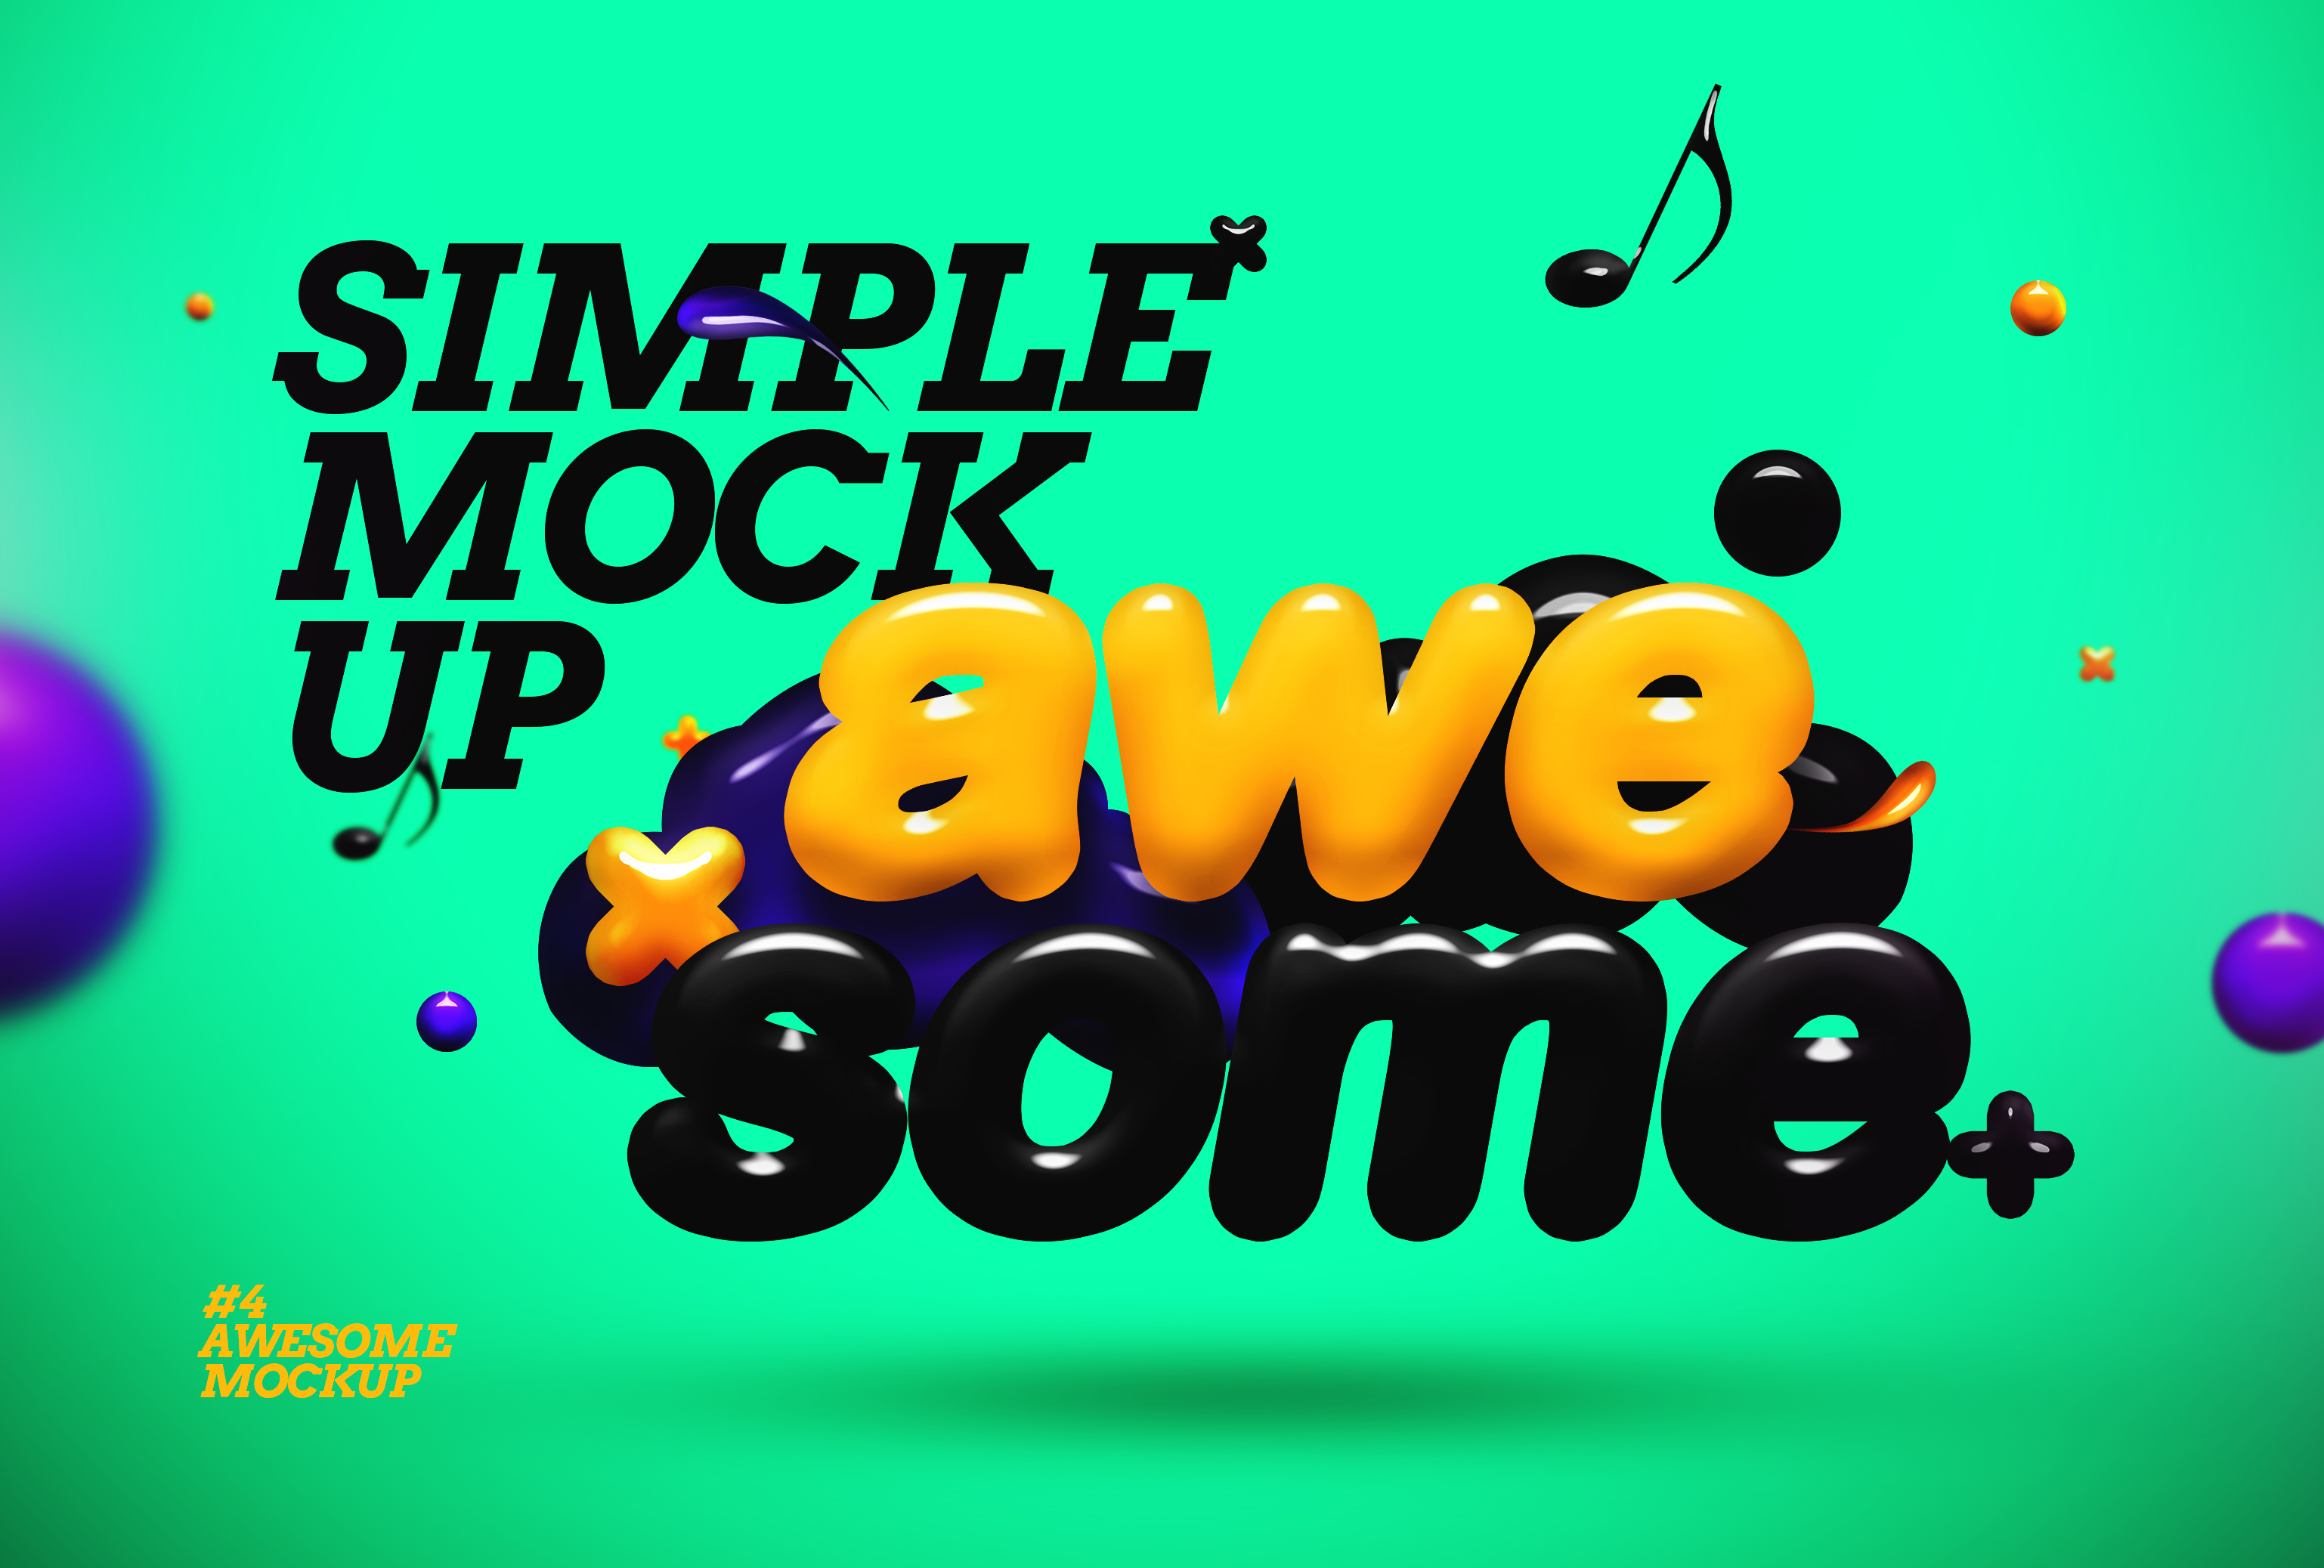 3D文字效果Awesome 3D Text Mockup#5